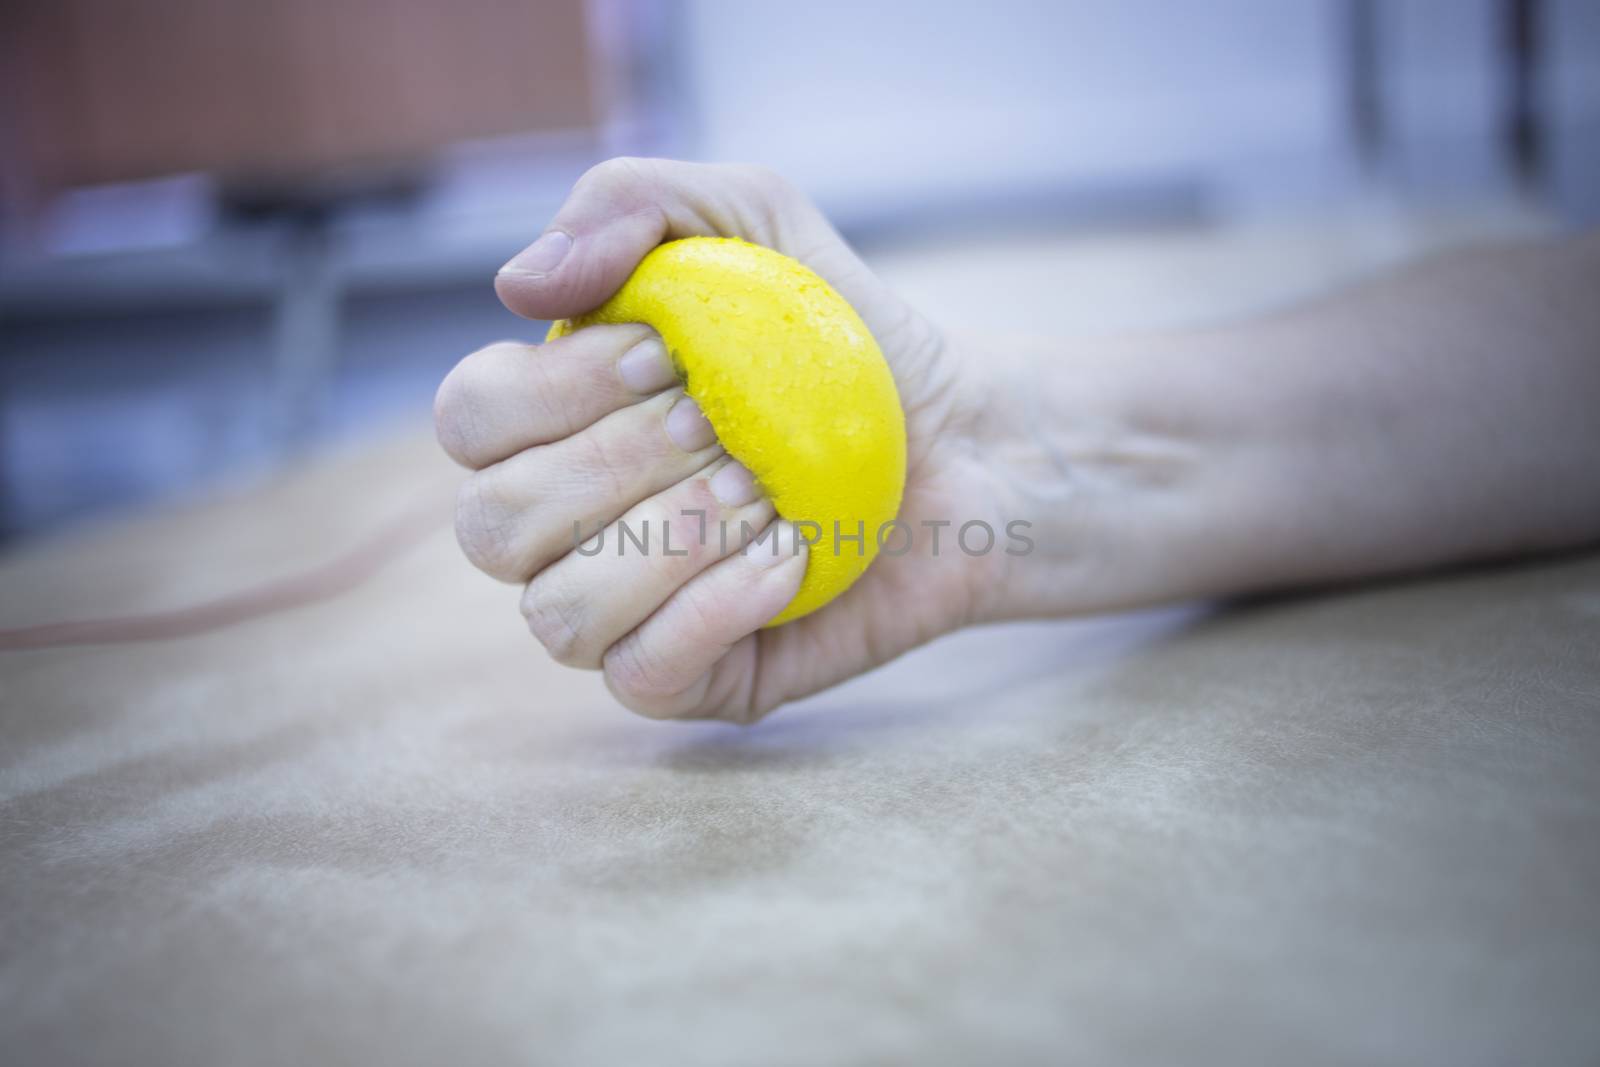 Patient hand squeezing physiotherapy ball by edwardolive